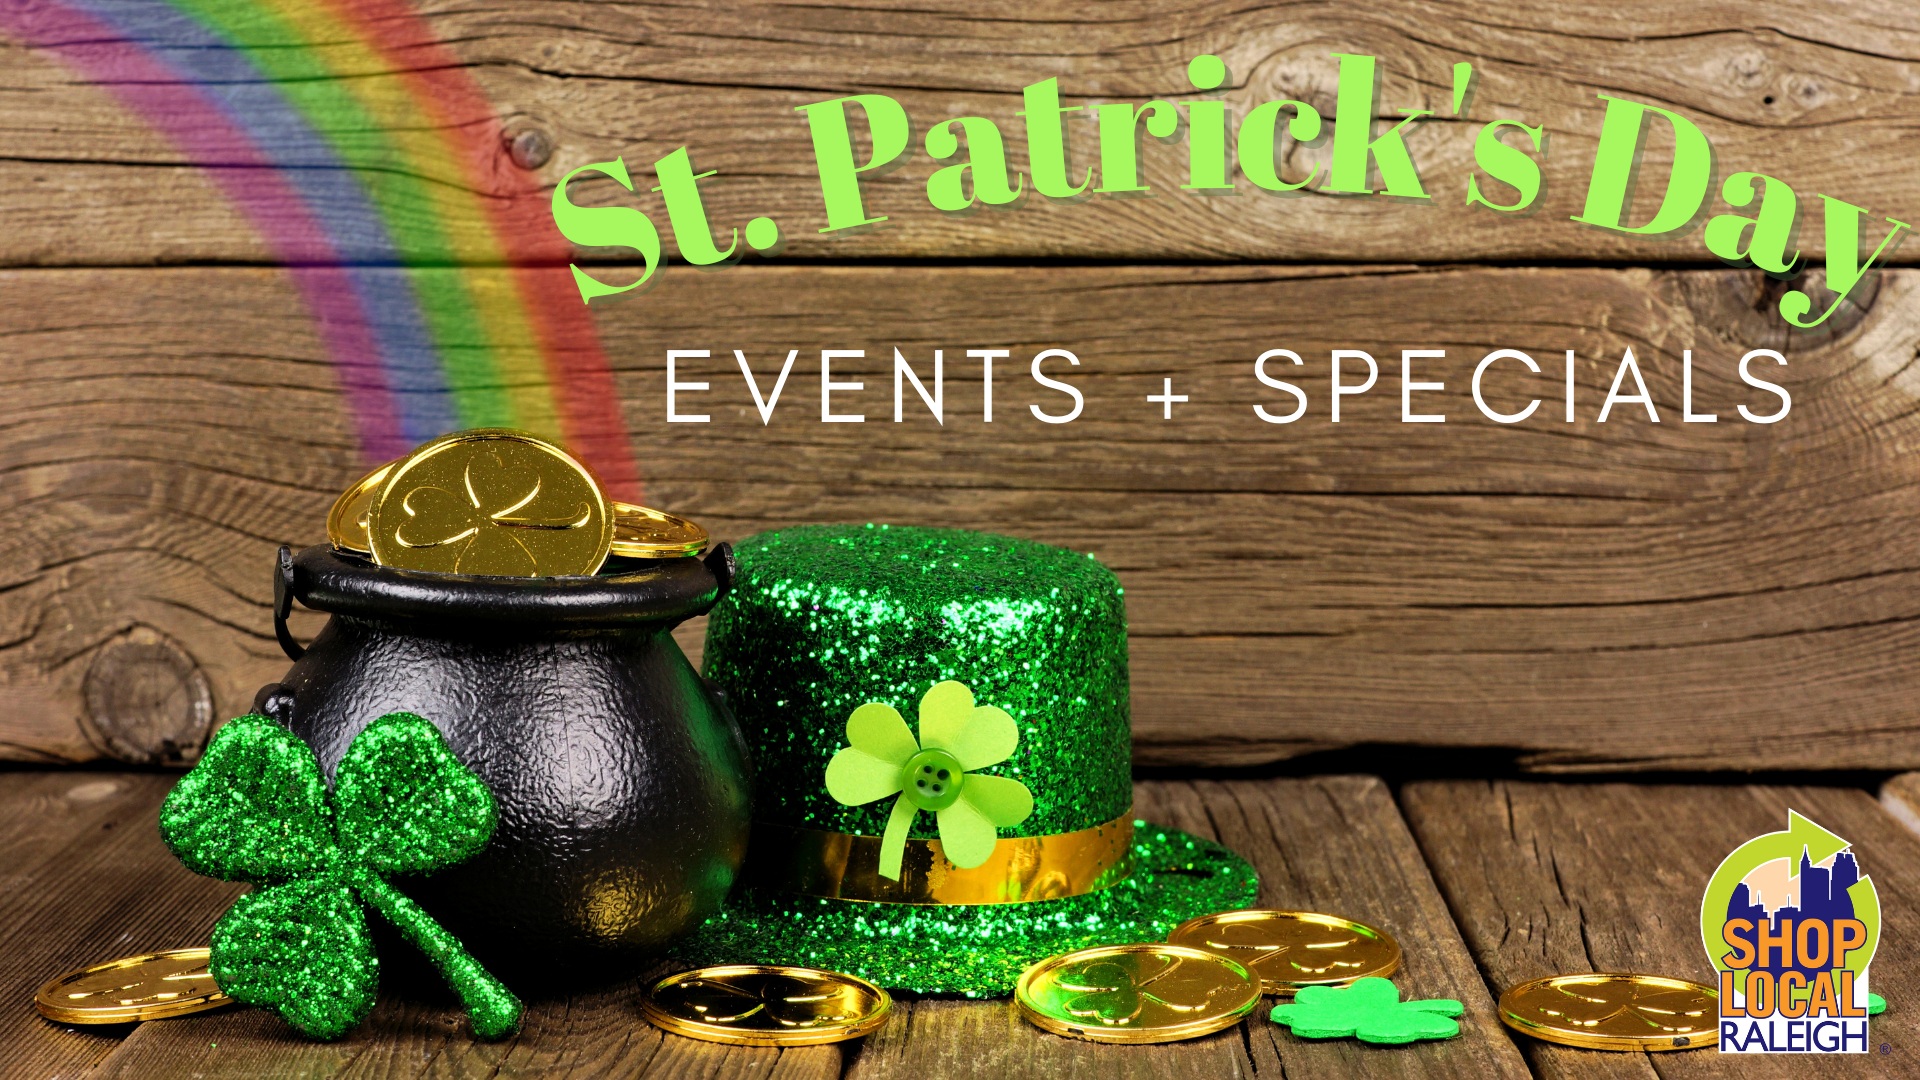 St. Patrick's Day Raleigh Events and Specials 2022